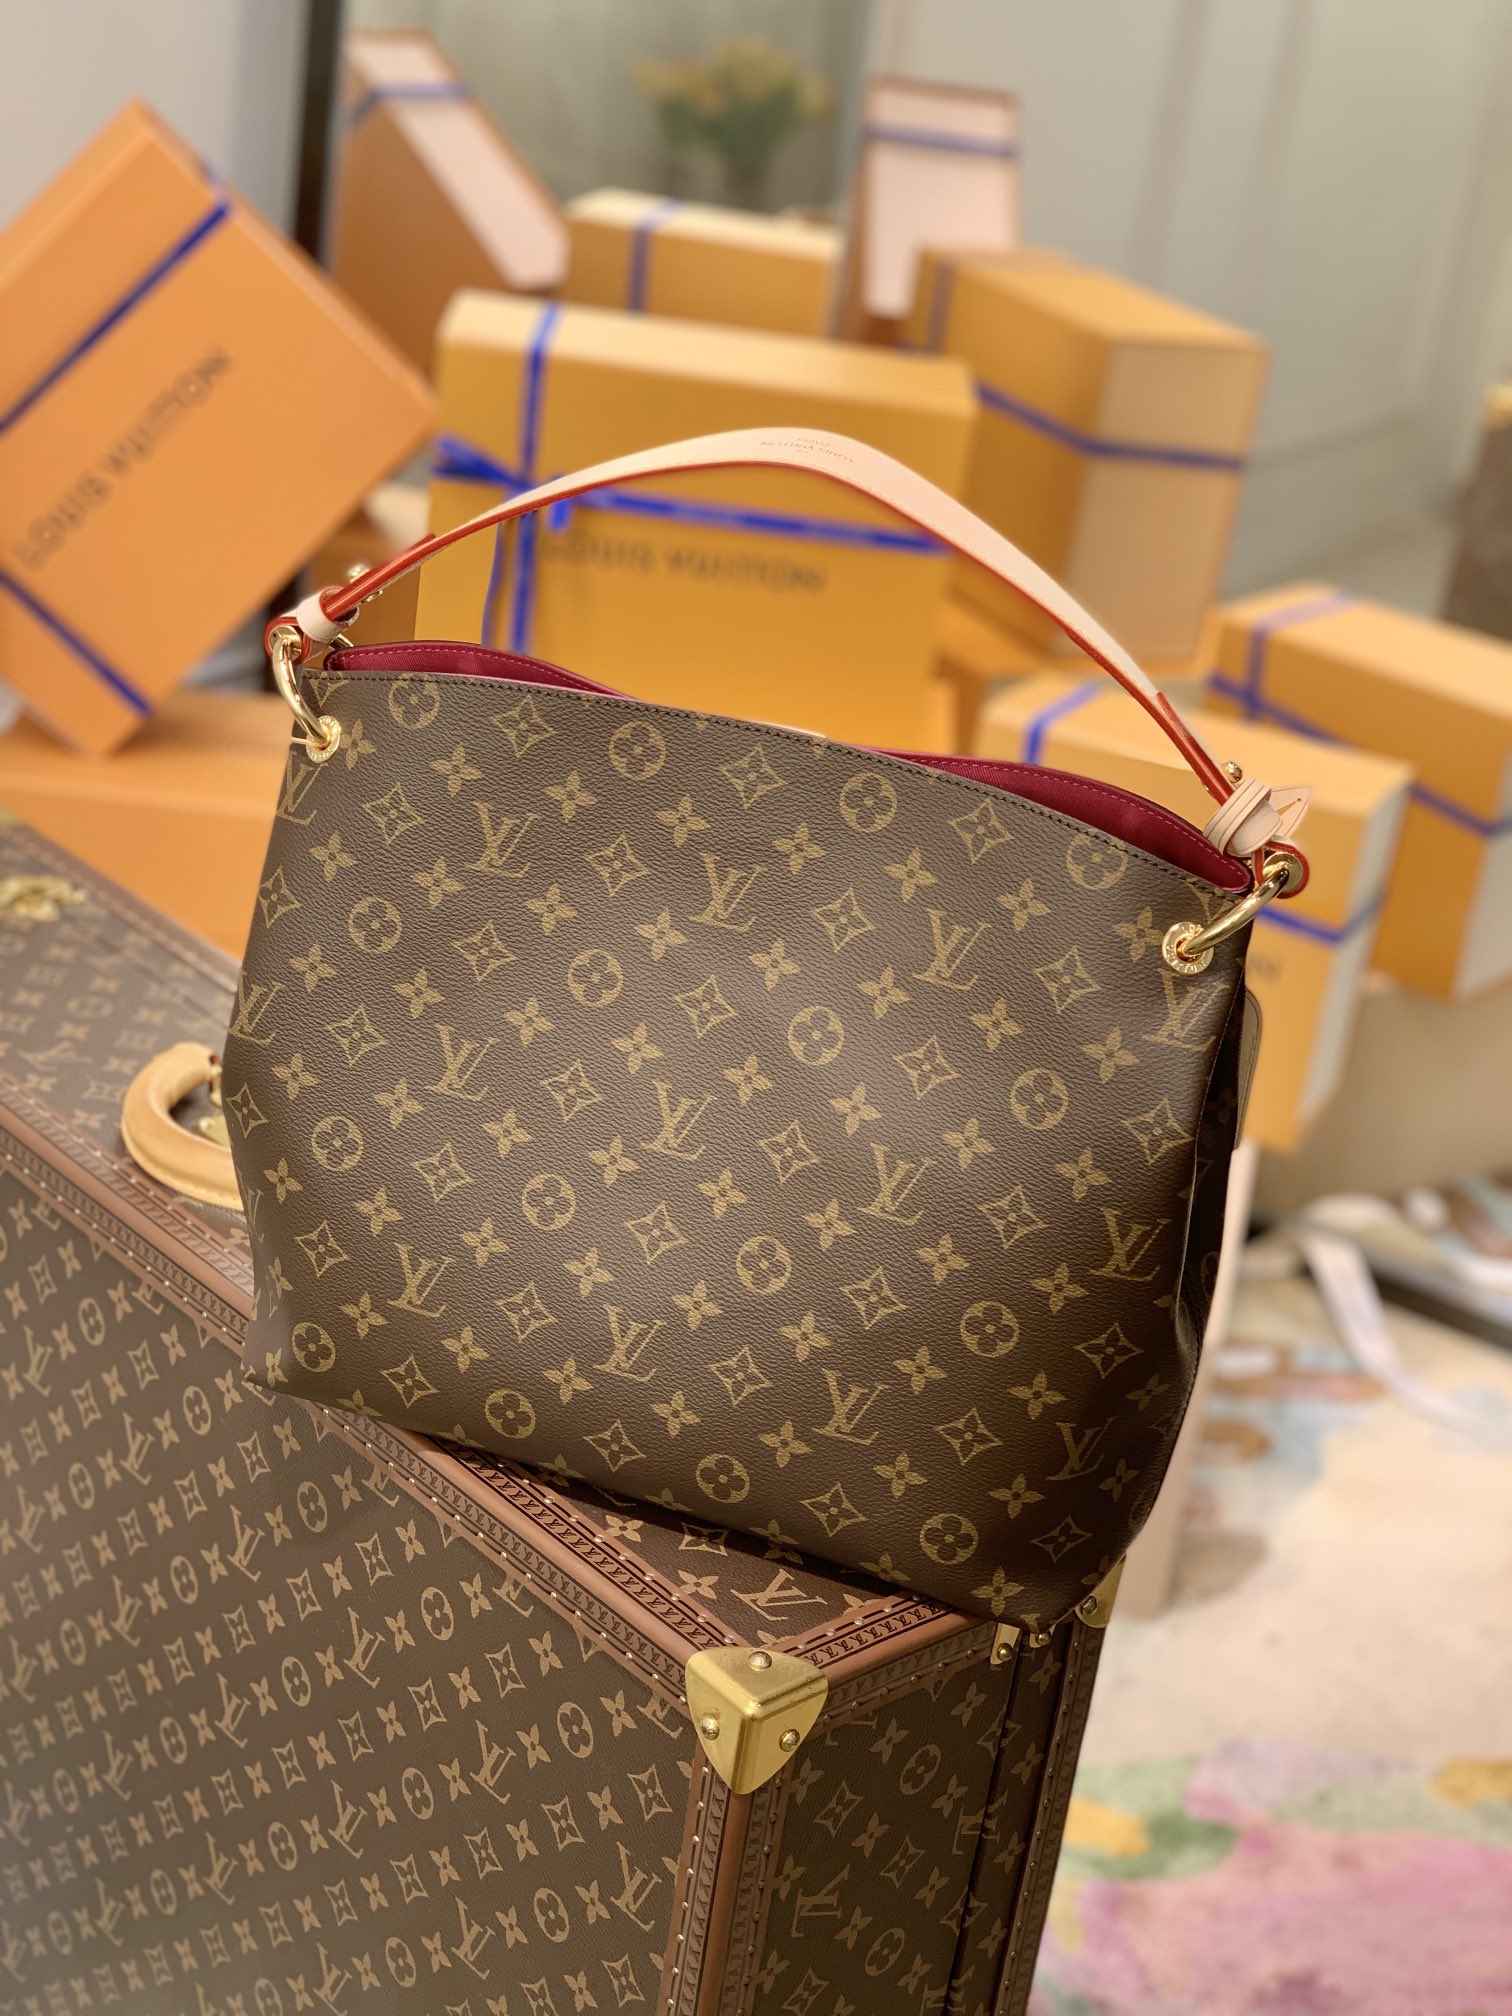 Louie Vuitton Graceful PM - clothing & accessories - by owner